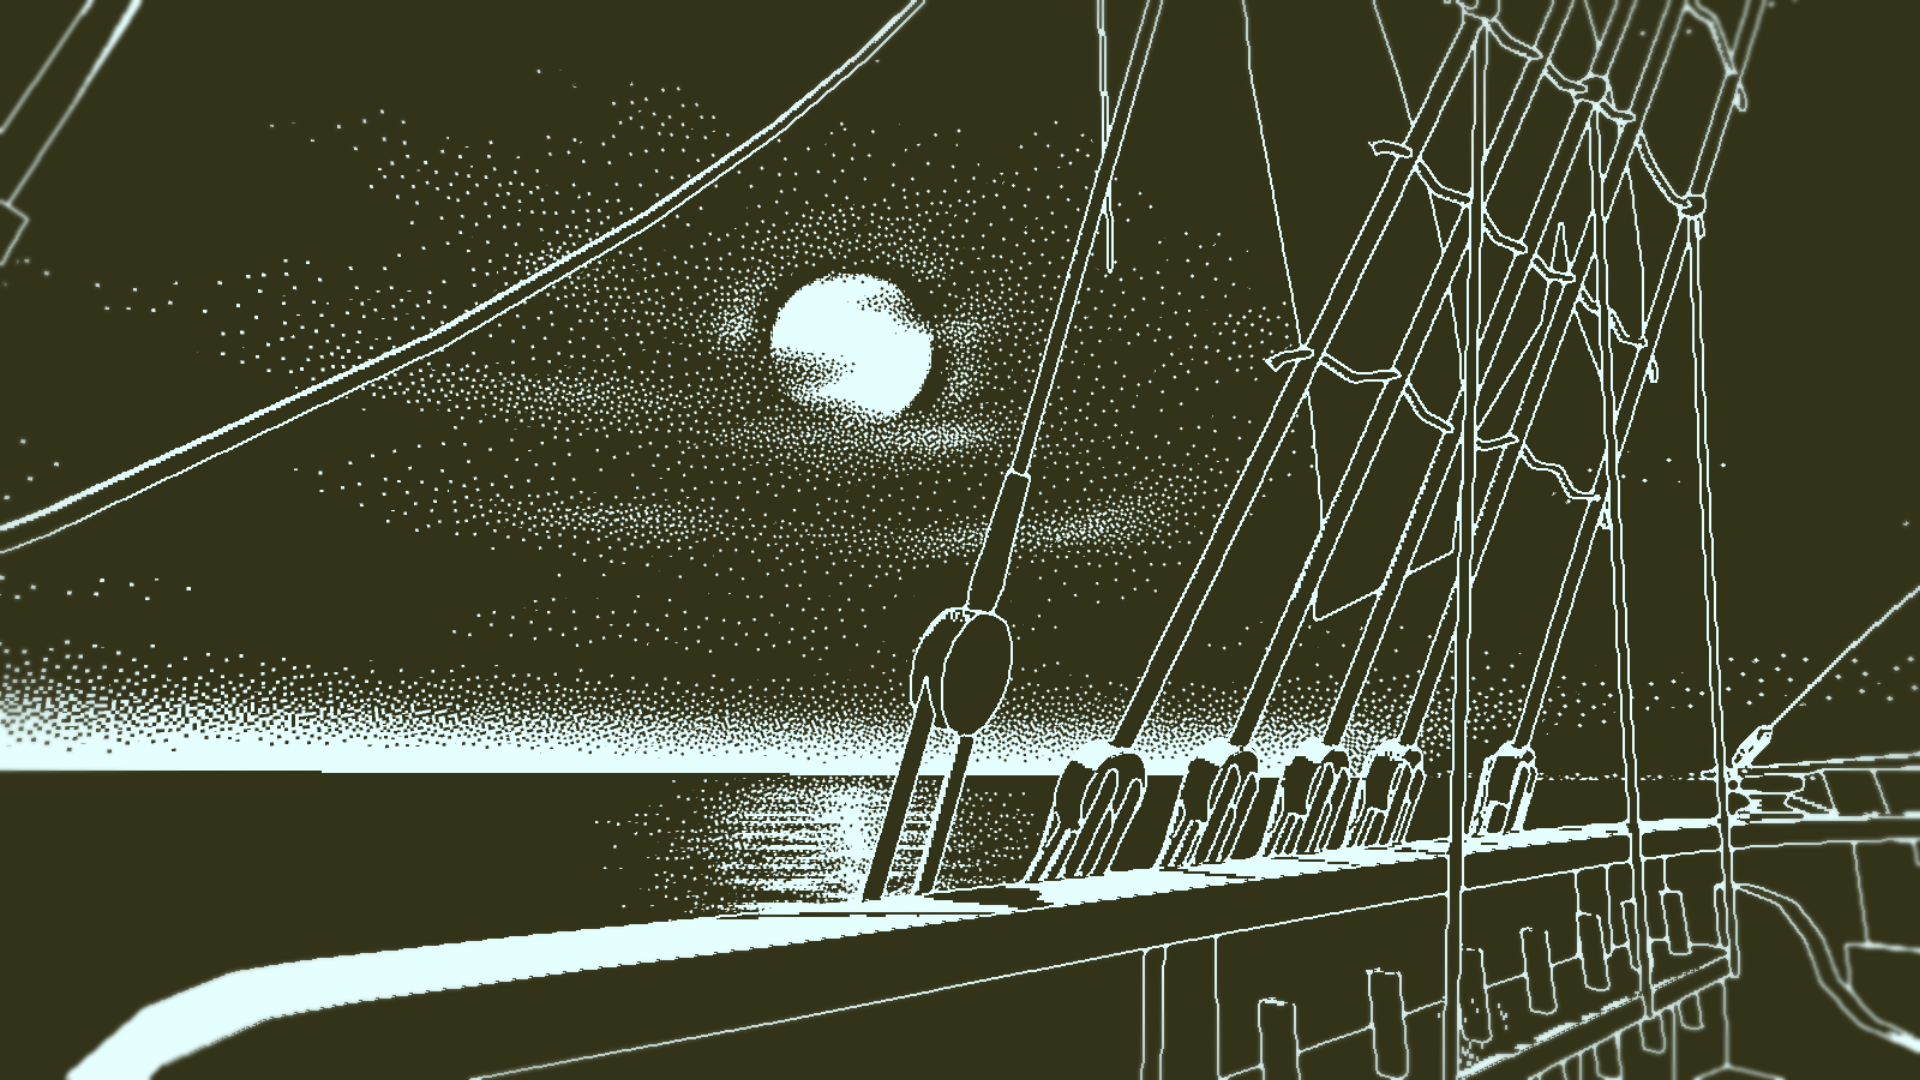 Fascination with the Obra Dinn. There's something that draws a